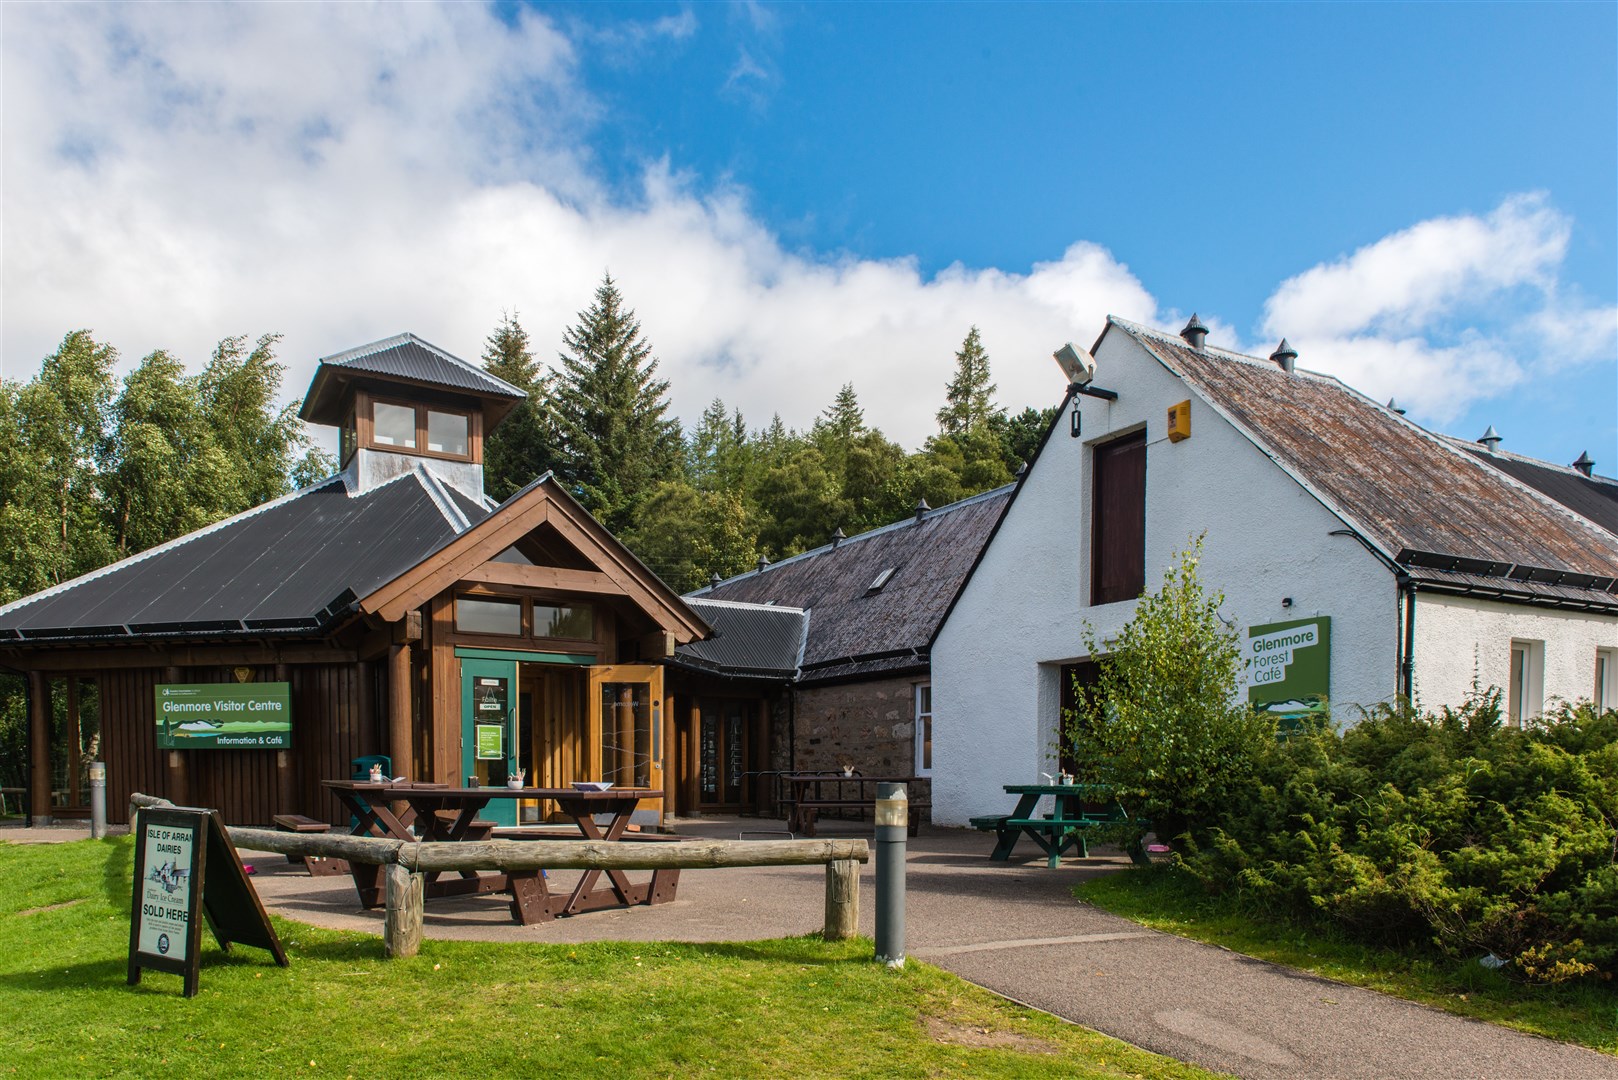 Glenmore visitor centre attracted around 120,000 visitors last year.